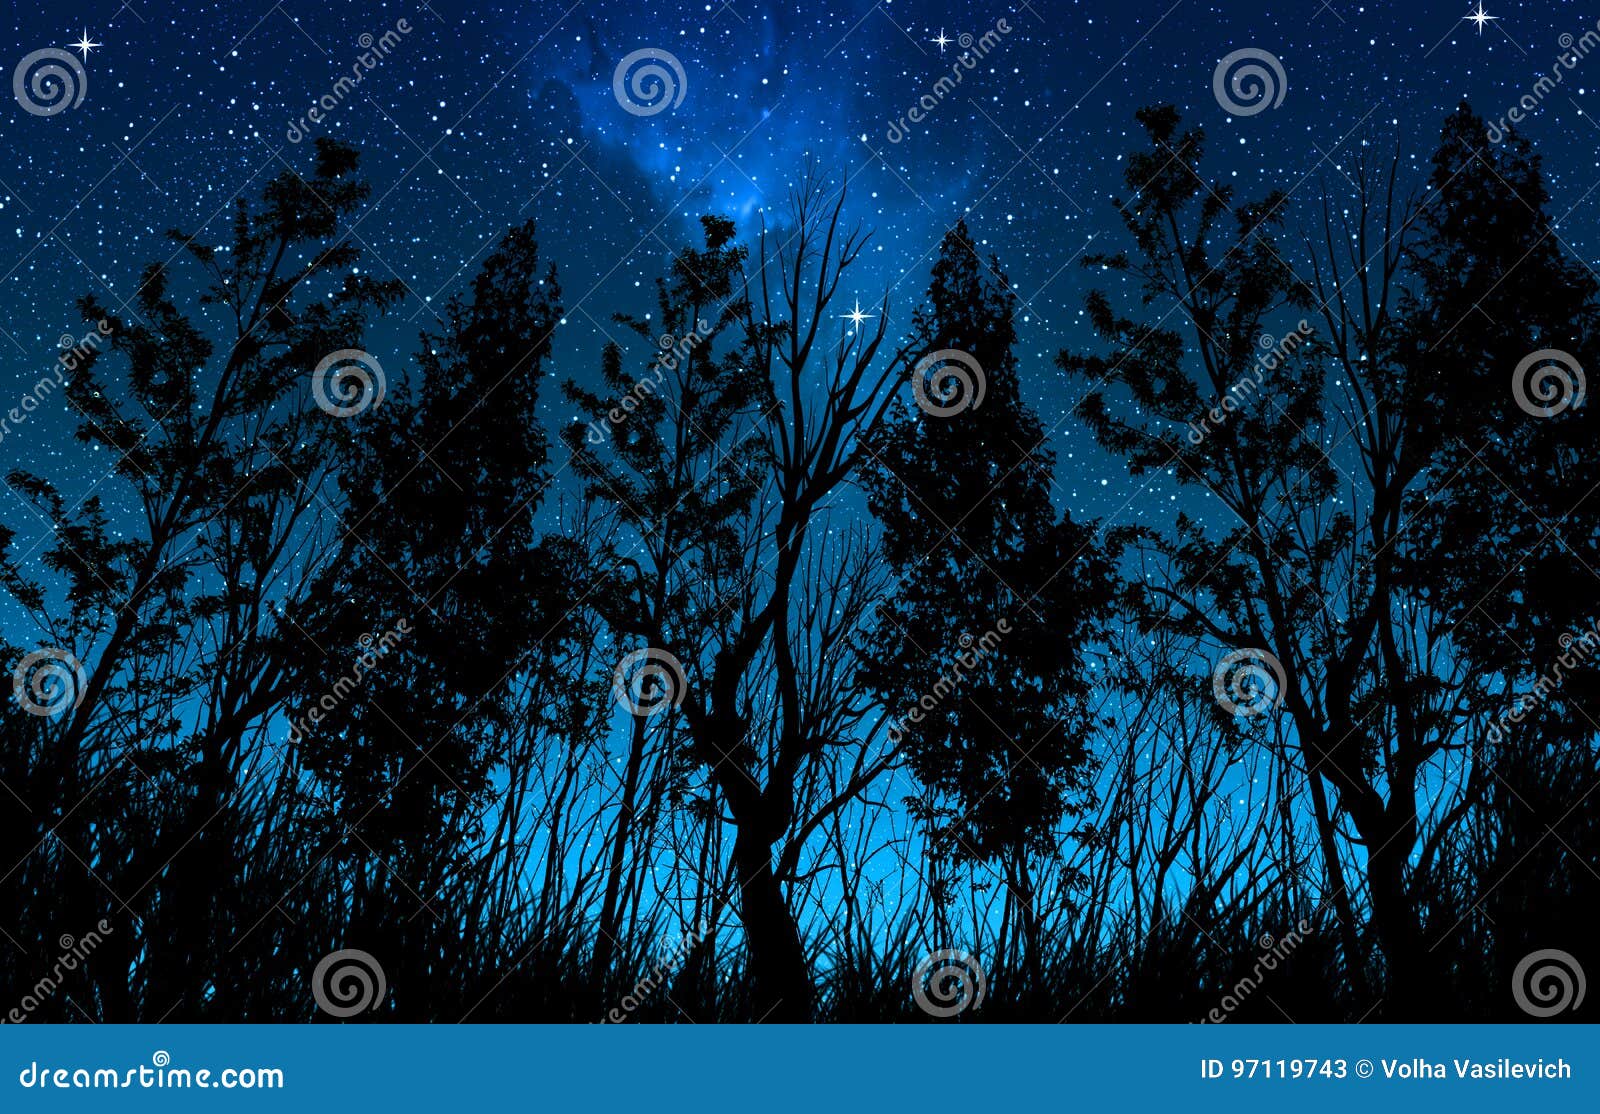 night starry sky with a milky way and stars, in the foreground trees and bushes of forest area